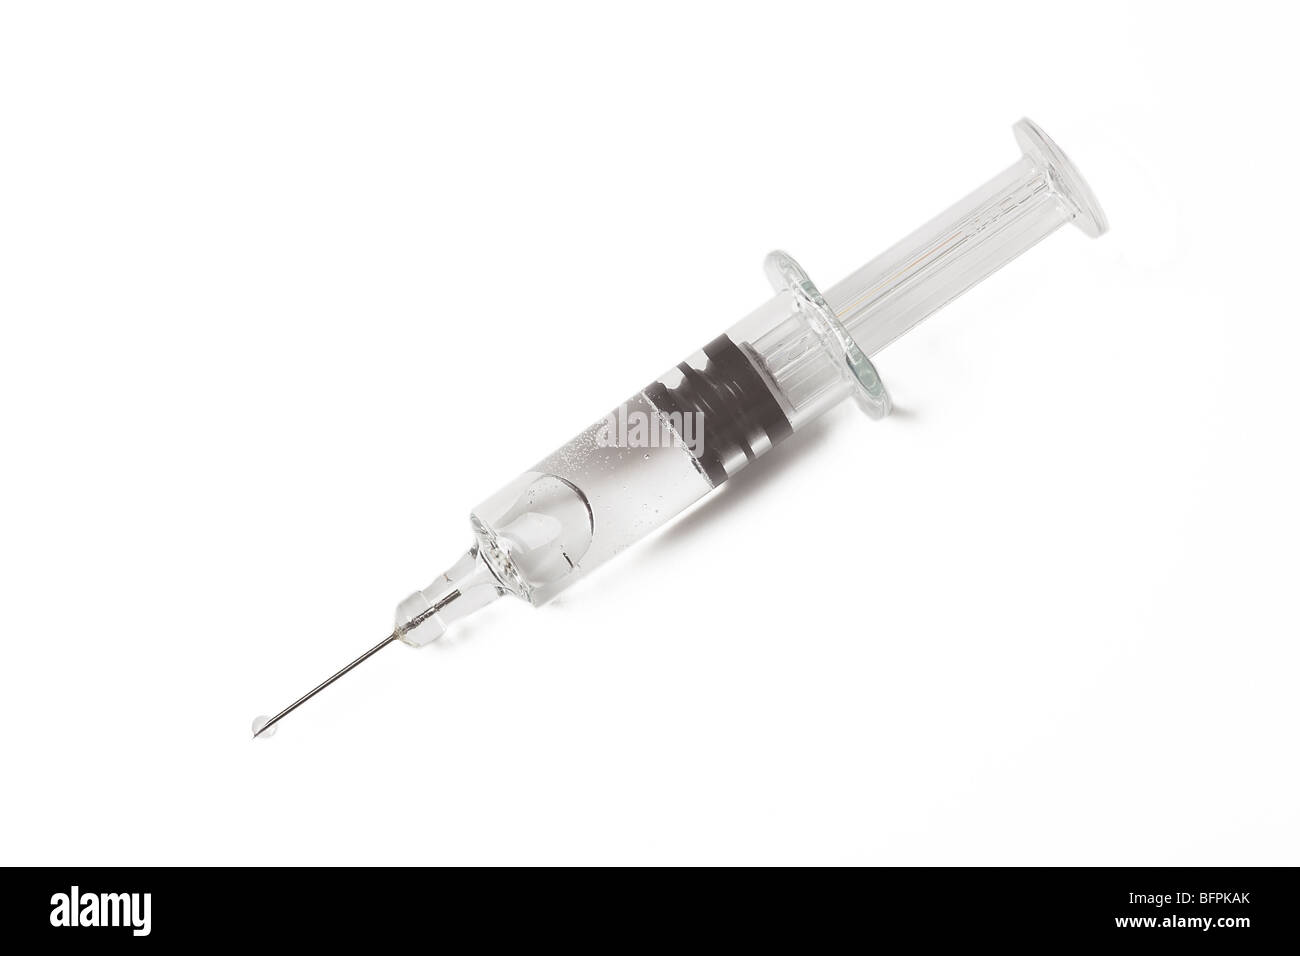 Small Syringe With Long Needle Stock Photo, Picture and Royalty Free Image.  Image 3798398.